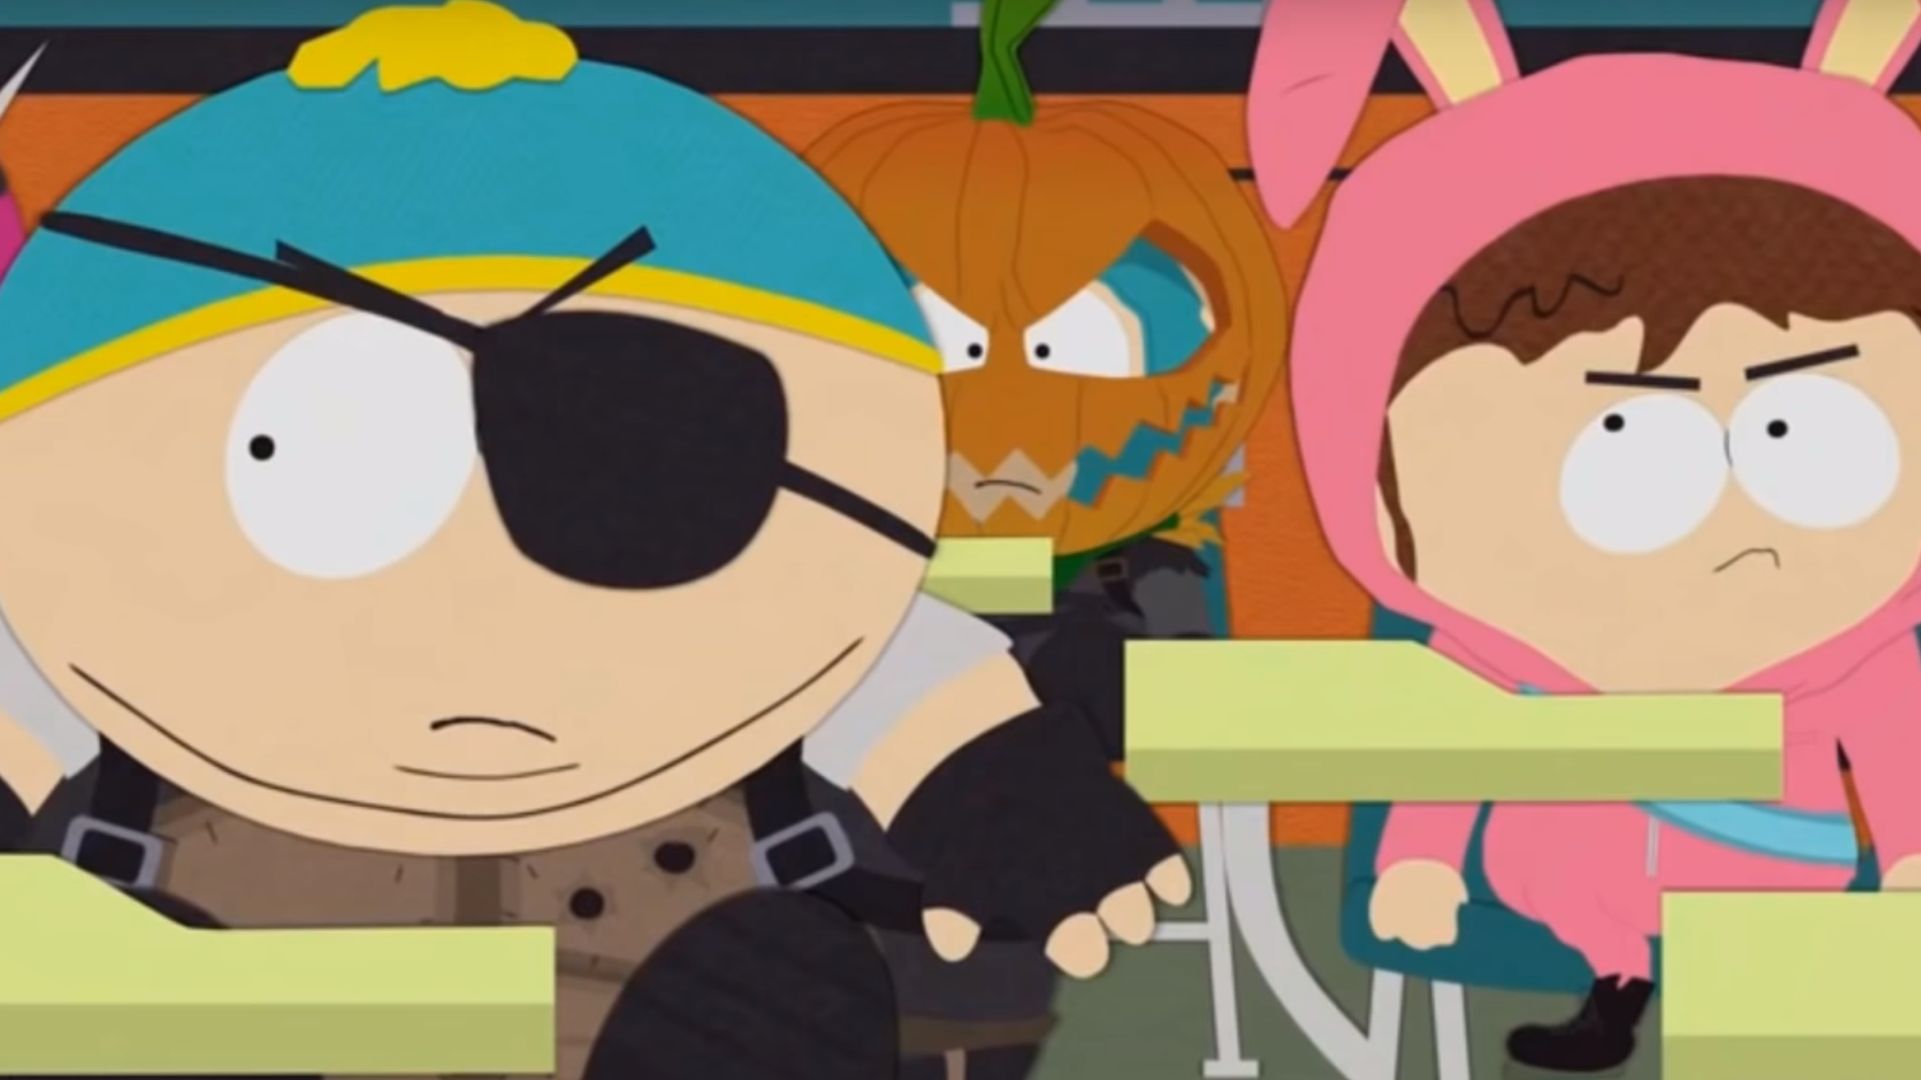 Cartman and co wore Fortnite costumes in South Park’s ... - 1921 x 1080 jpeg 109kB